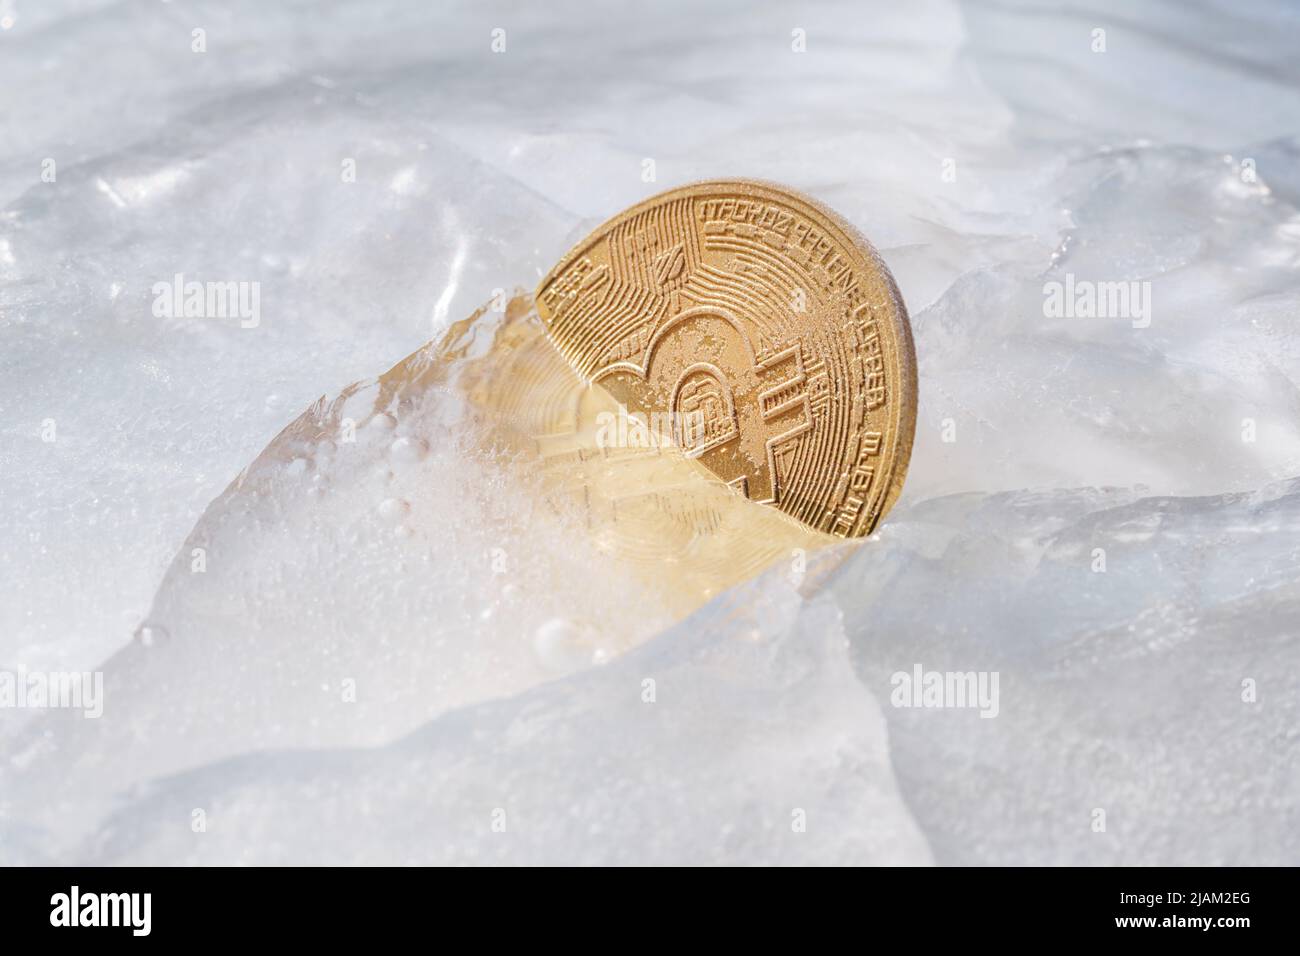 Golden coin with bitcoin symbol frozen in ice. Freezing of cryptocurrency, depreciation, legal and economic problems of the cryptocurrency market them Stock Photo